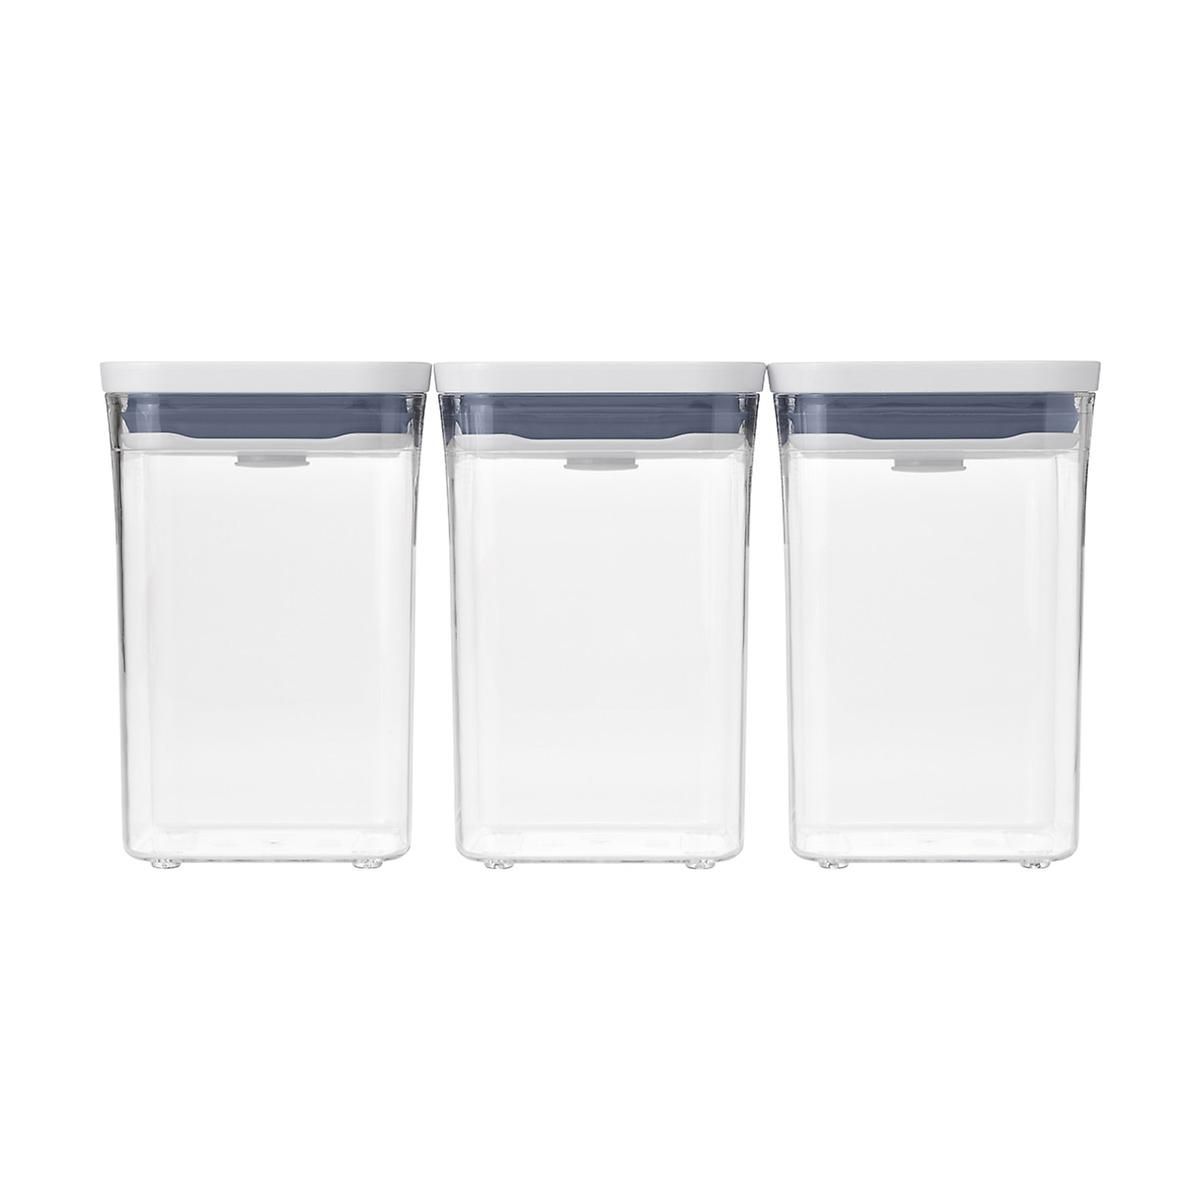 OXO Good Grips 3-Piece POP Canister Set | The Container Store